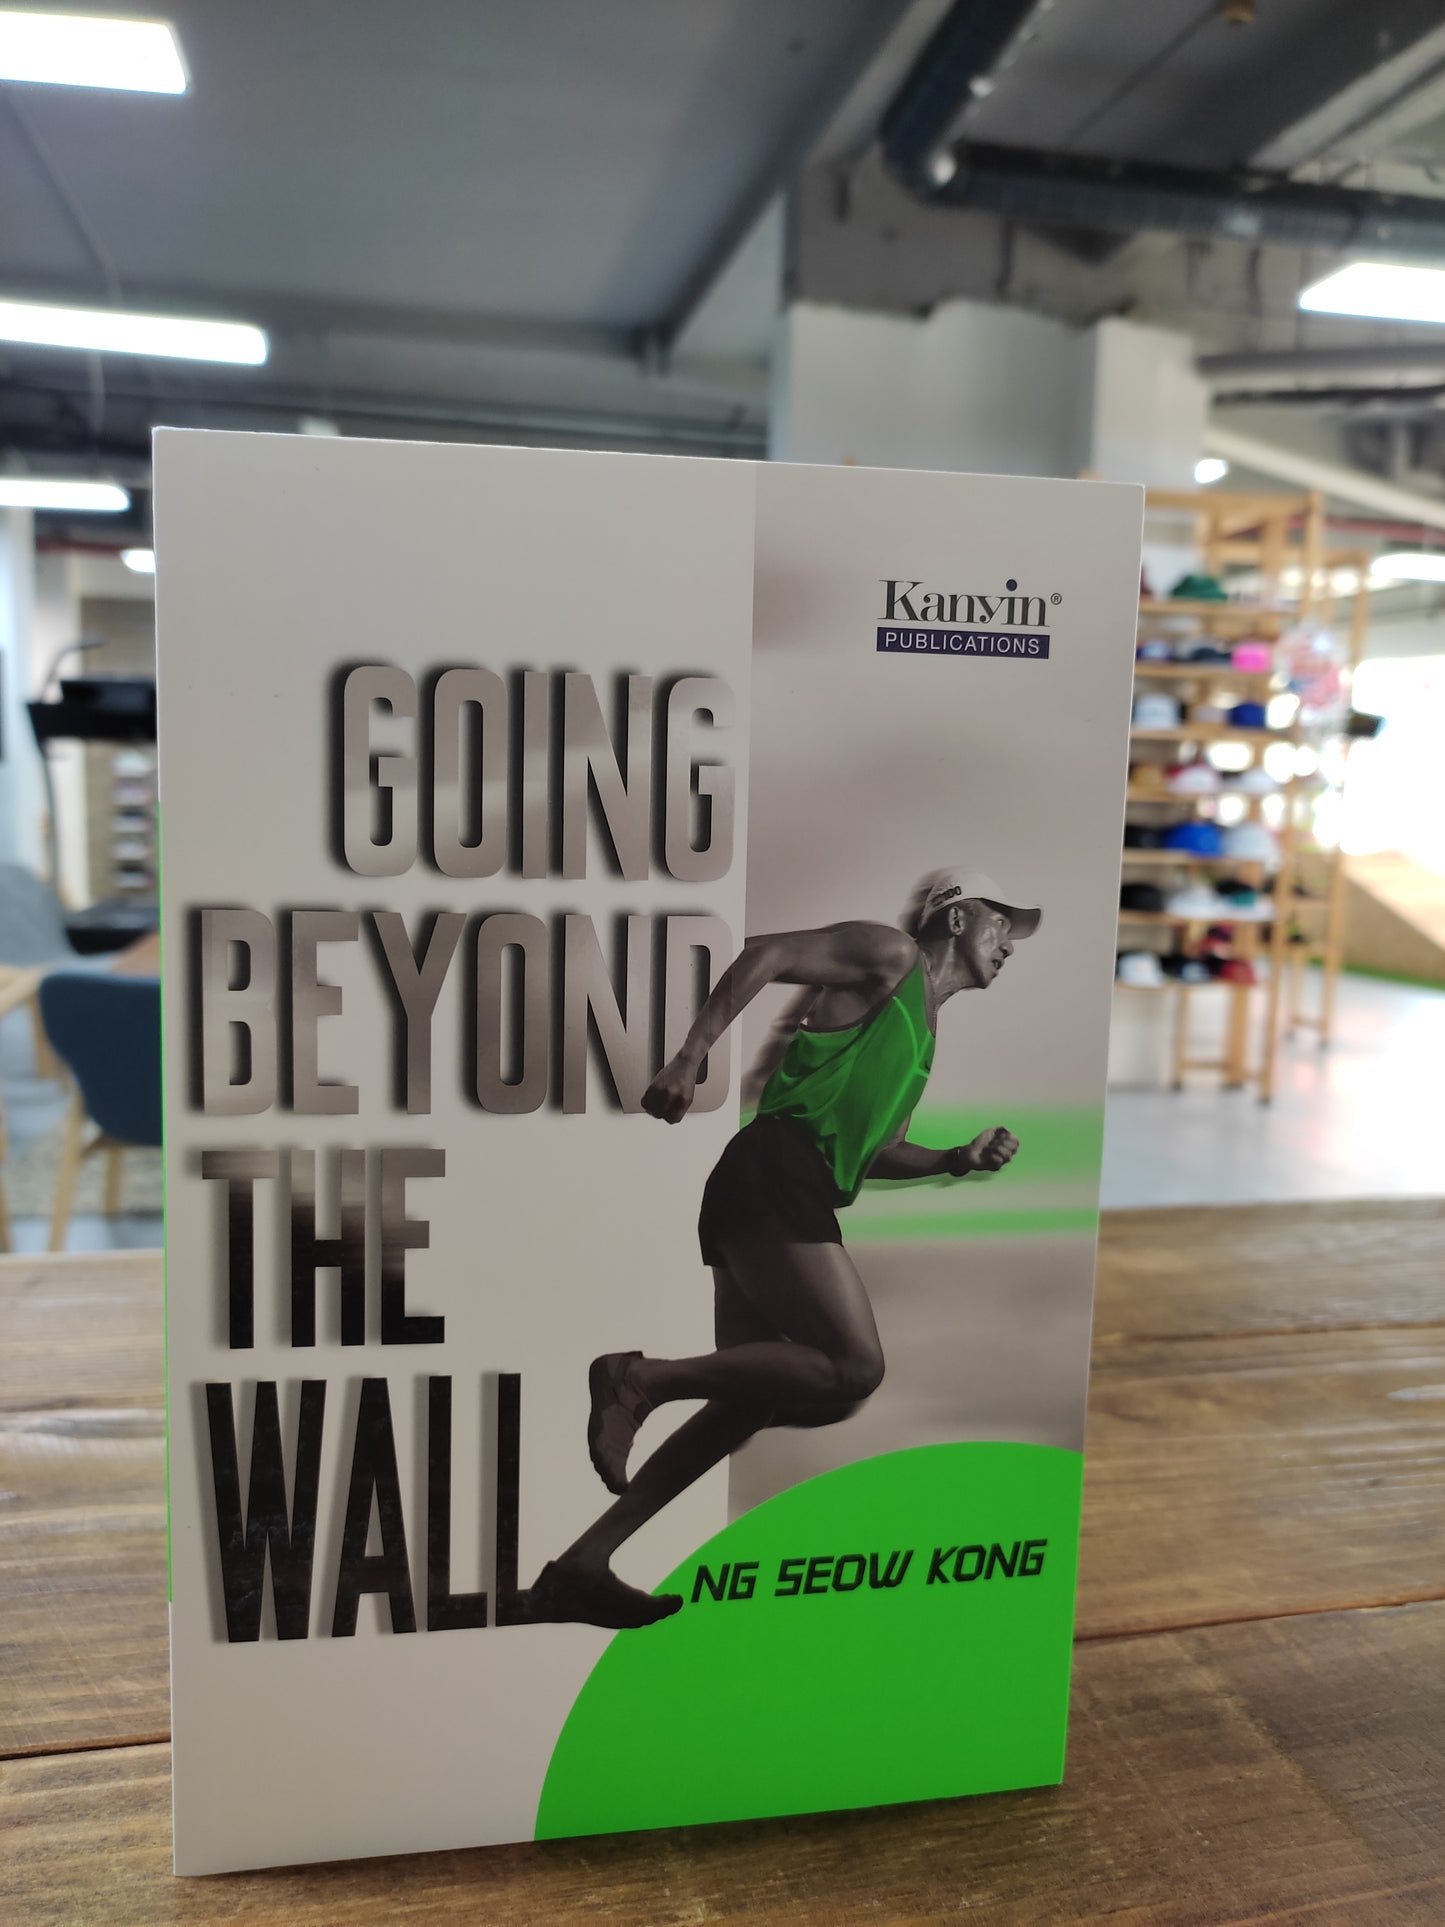 Going Beyond The Wall by Ng Seow Kong